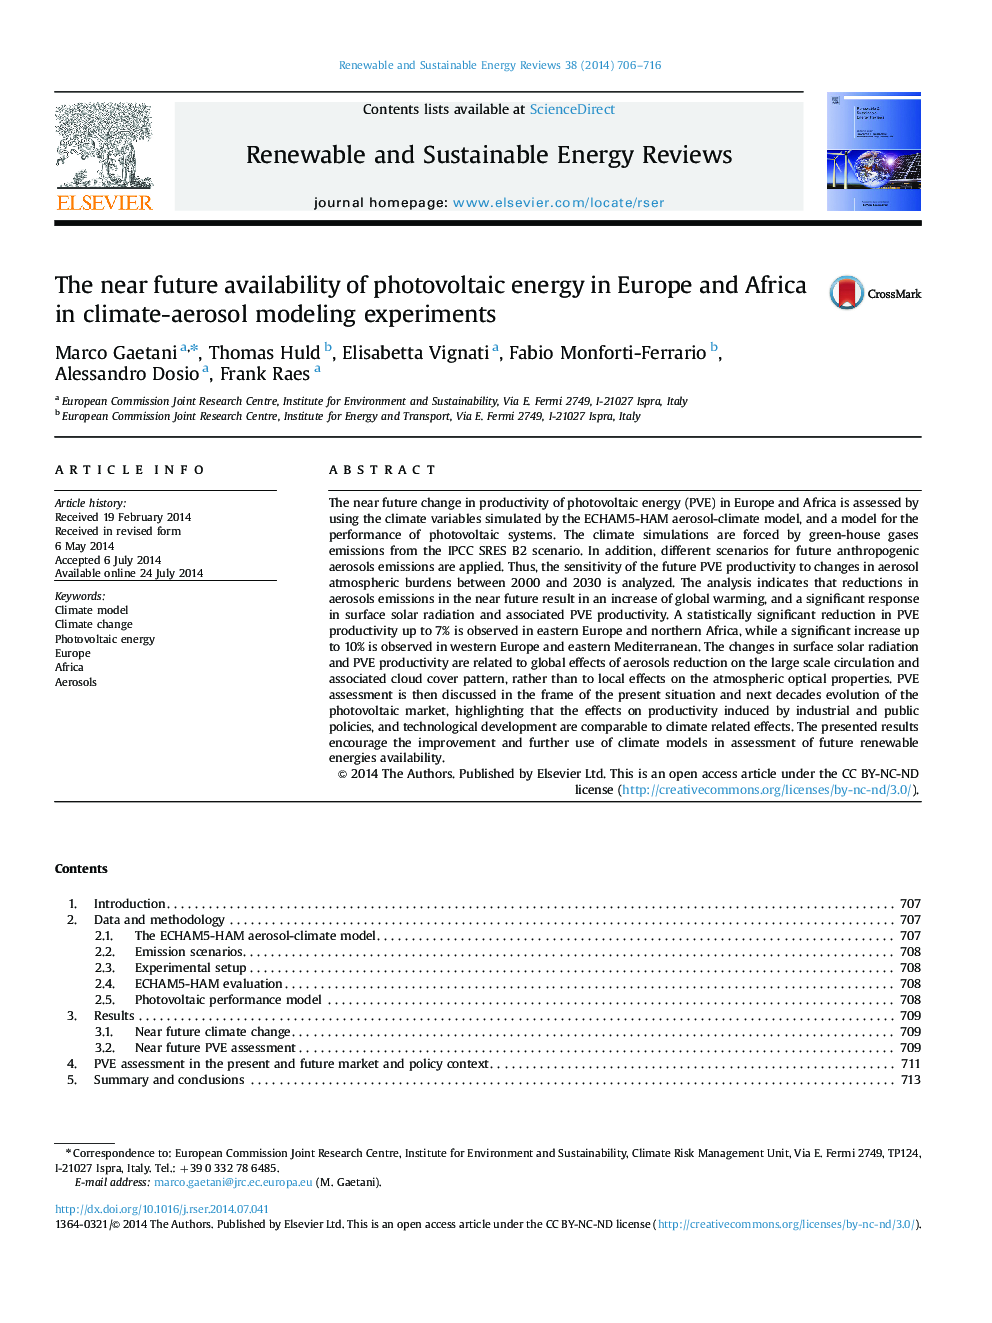 The near future availability of photovoltaic energy in Europe and Africa in climate-aerosol modeling experiments